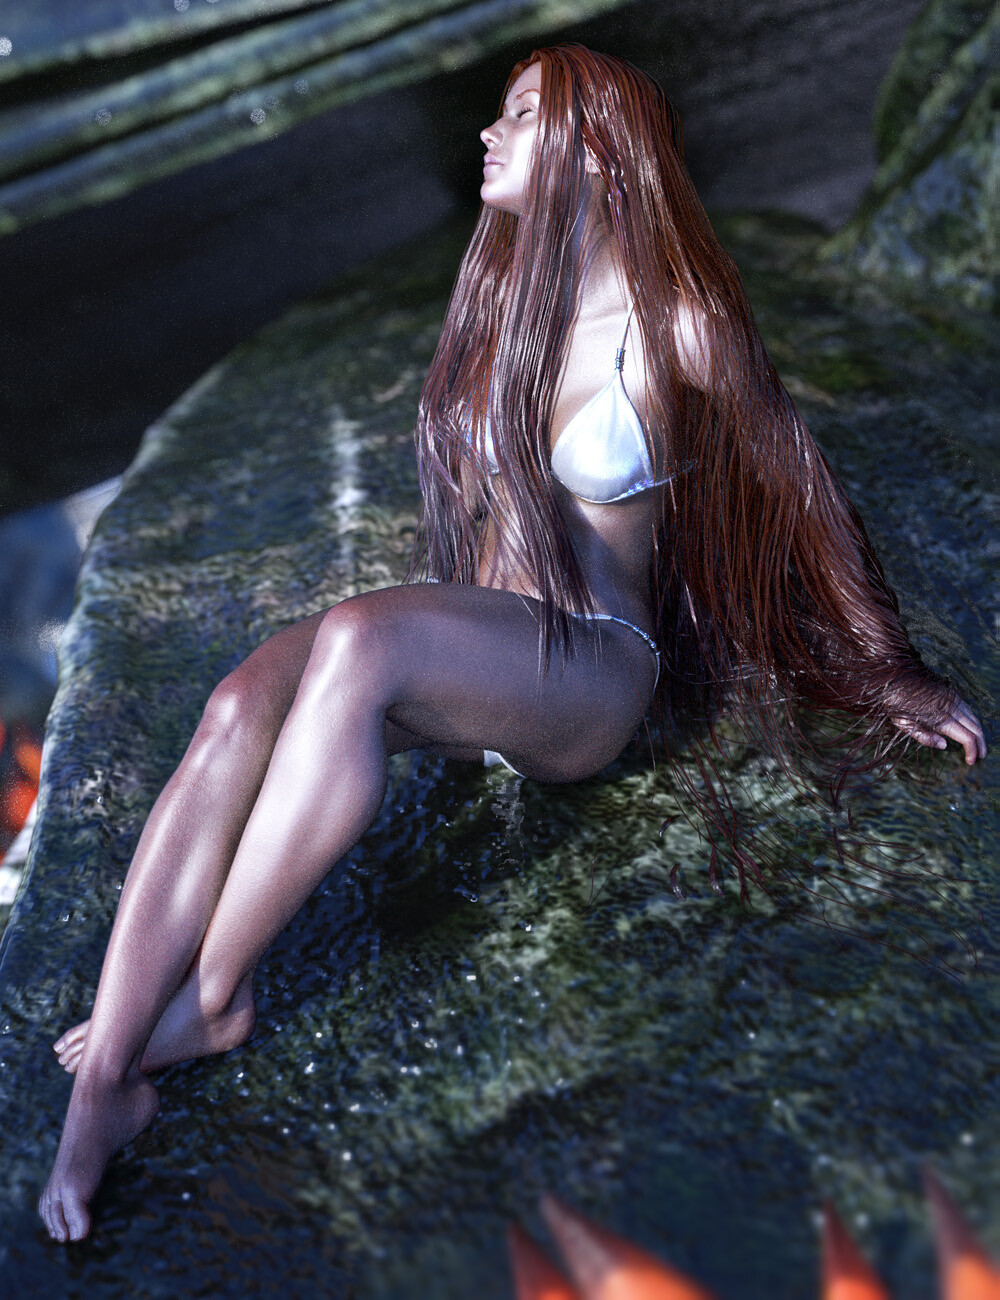 "Beach Siren"
One of the more artistic renders for the Aguja/Alascanus project (which featured mermaids and mermen with fish tails and stuff).
I wanted to showcase the dForce compliant hair which can drape nicely.